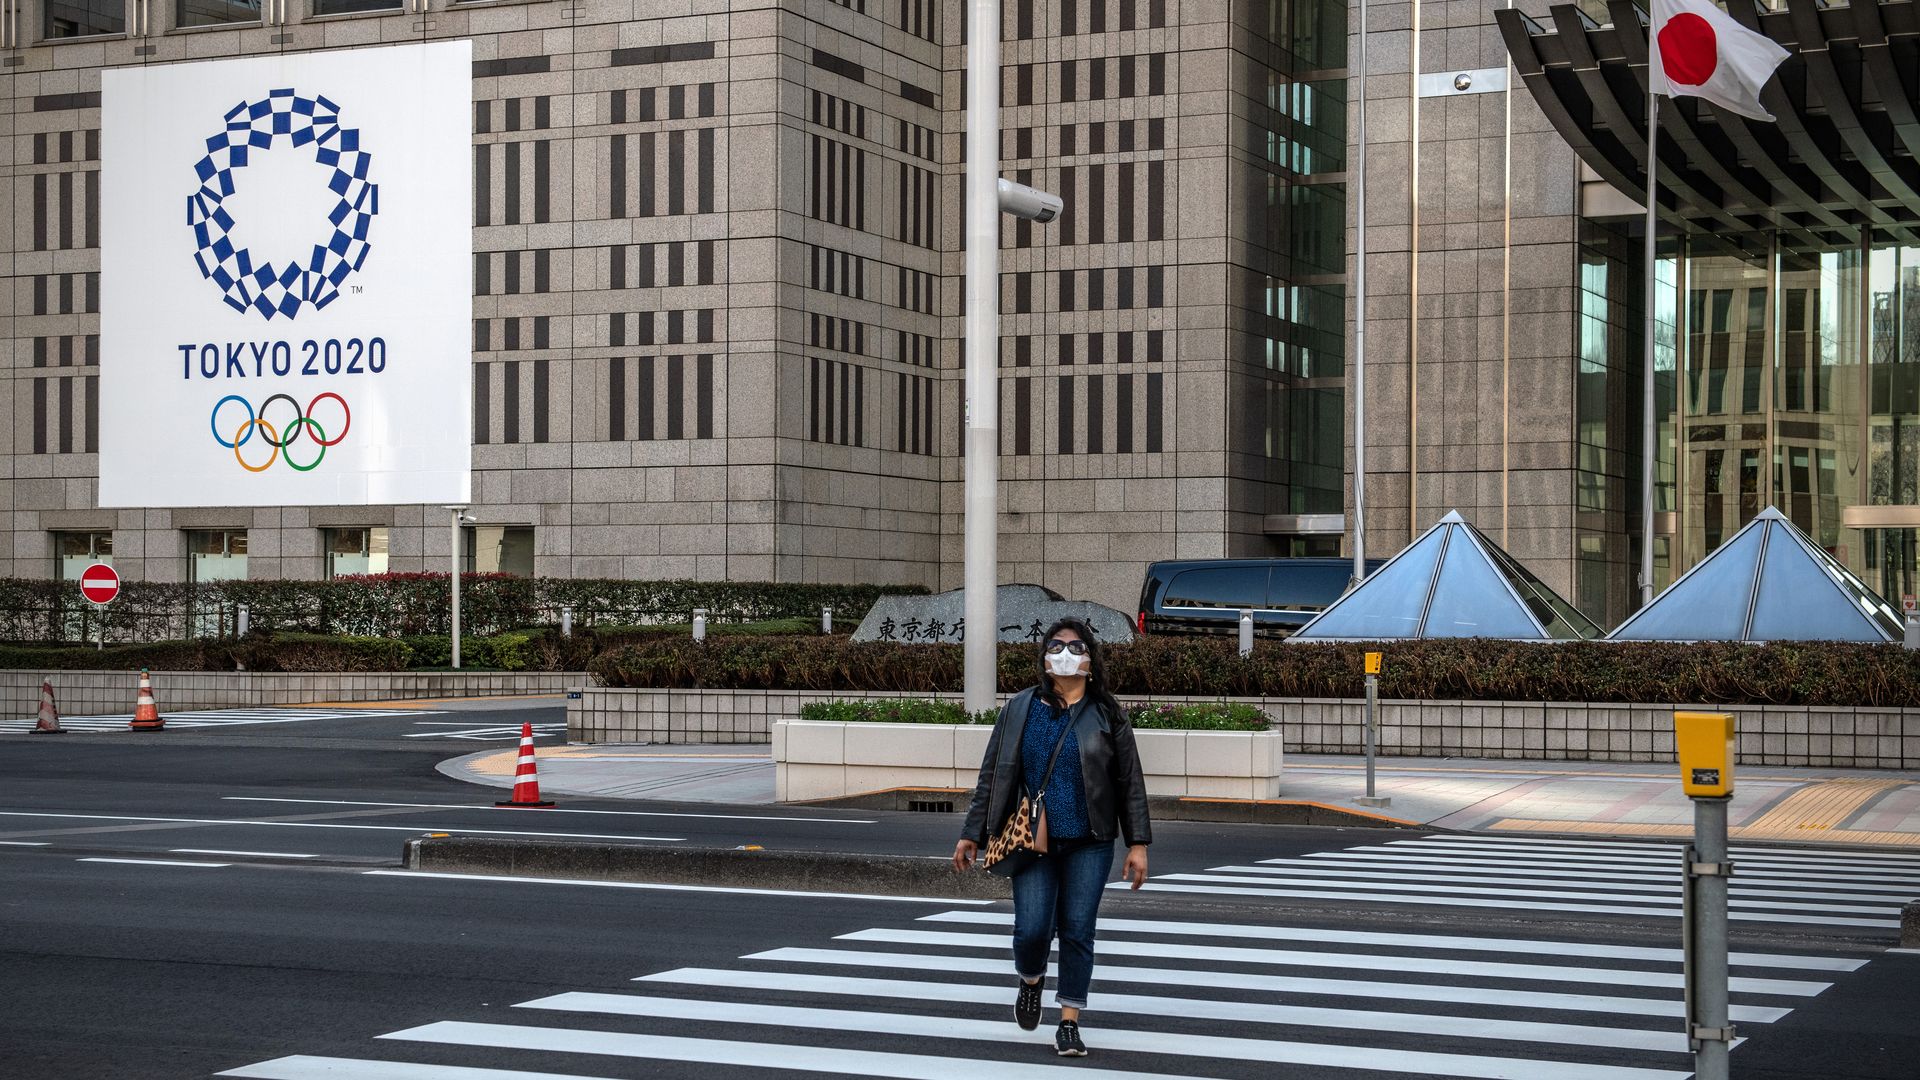 A woman wearing a face mask walks past a Tokyo 2020 Olympics banner displayed on the side of a building on March 19, 2020 in Tokyo, Japan. 